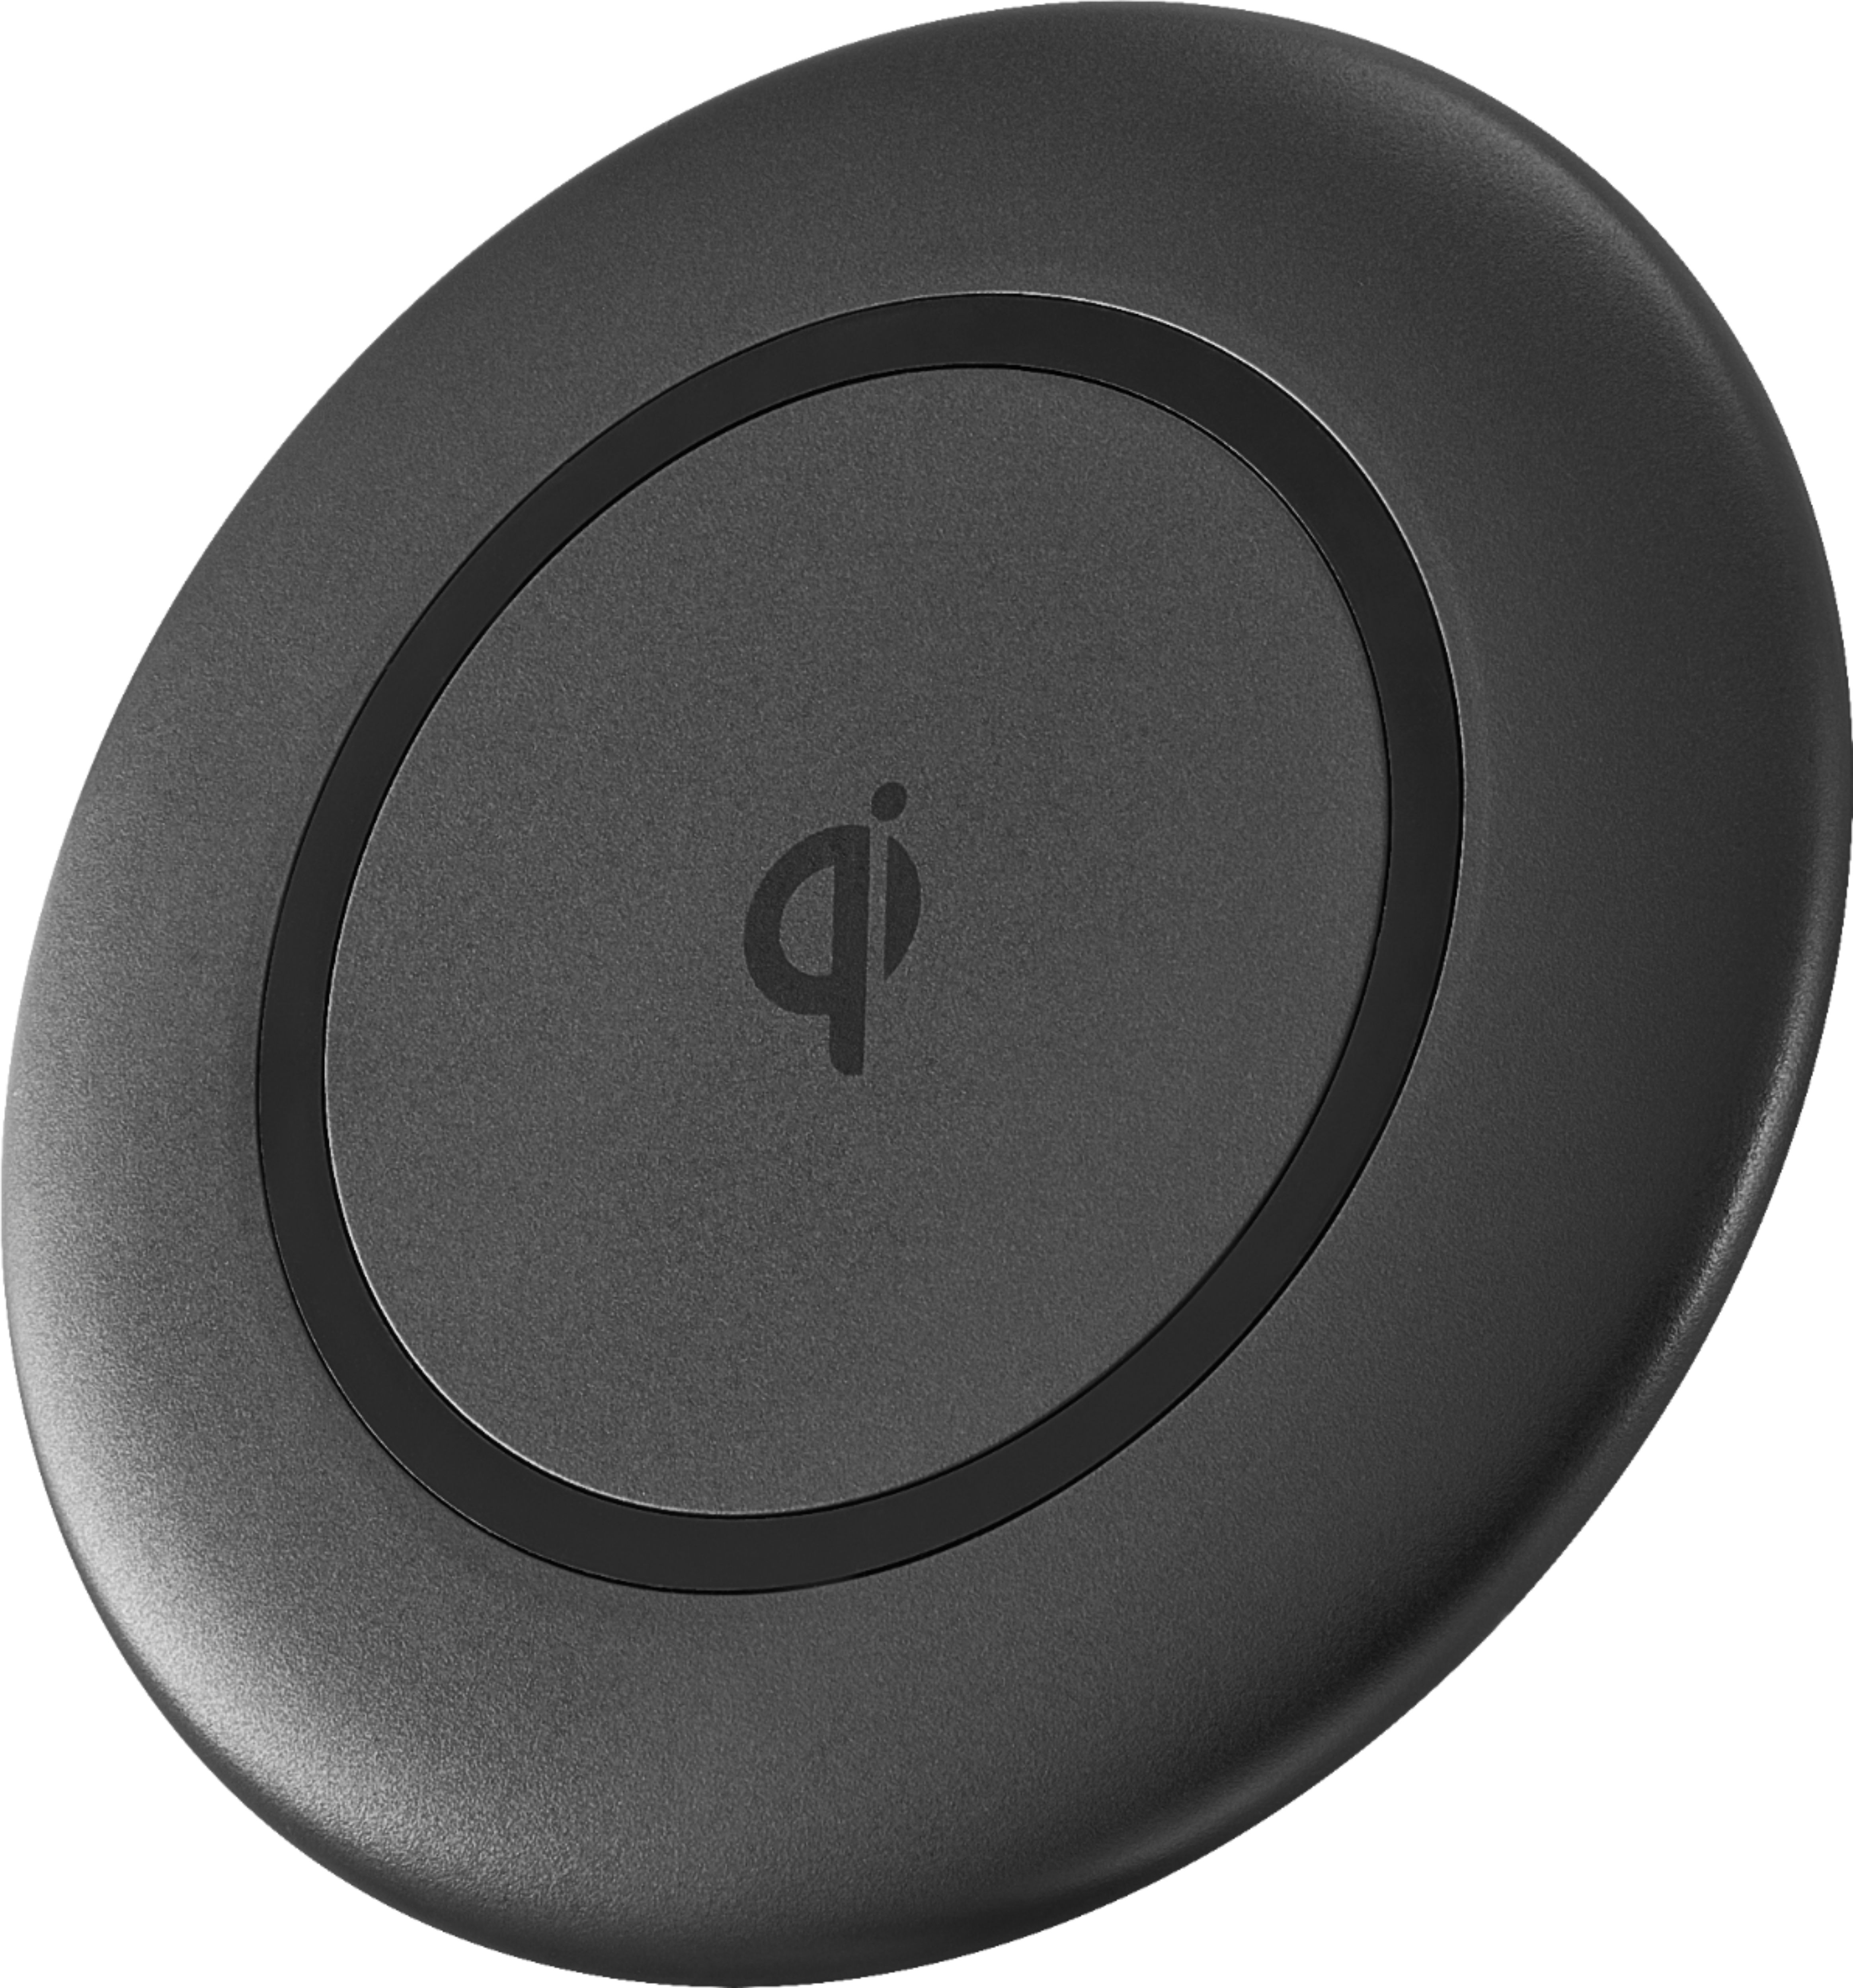 Insignia™ - 10W Qi Certified Wireless Charging Pad for iPhone/Android - Black